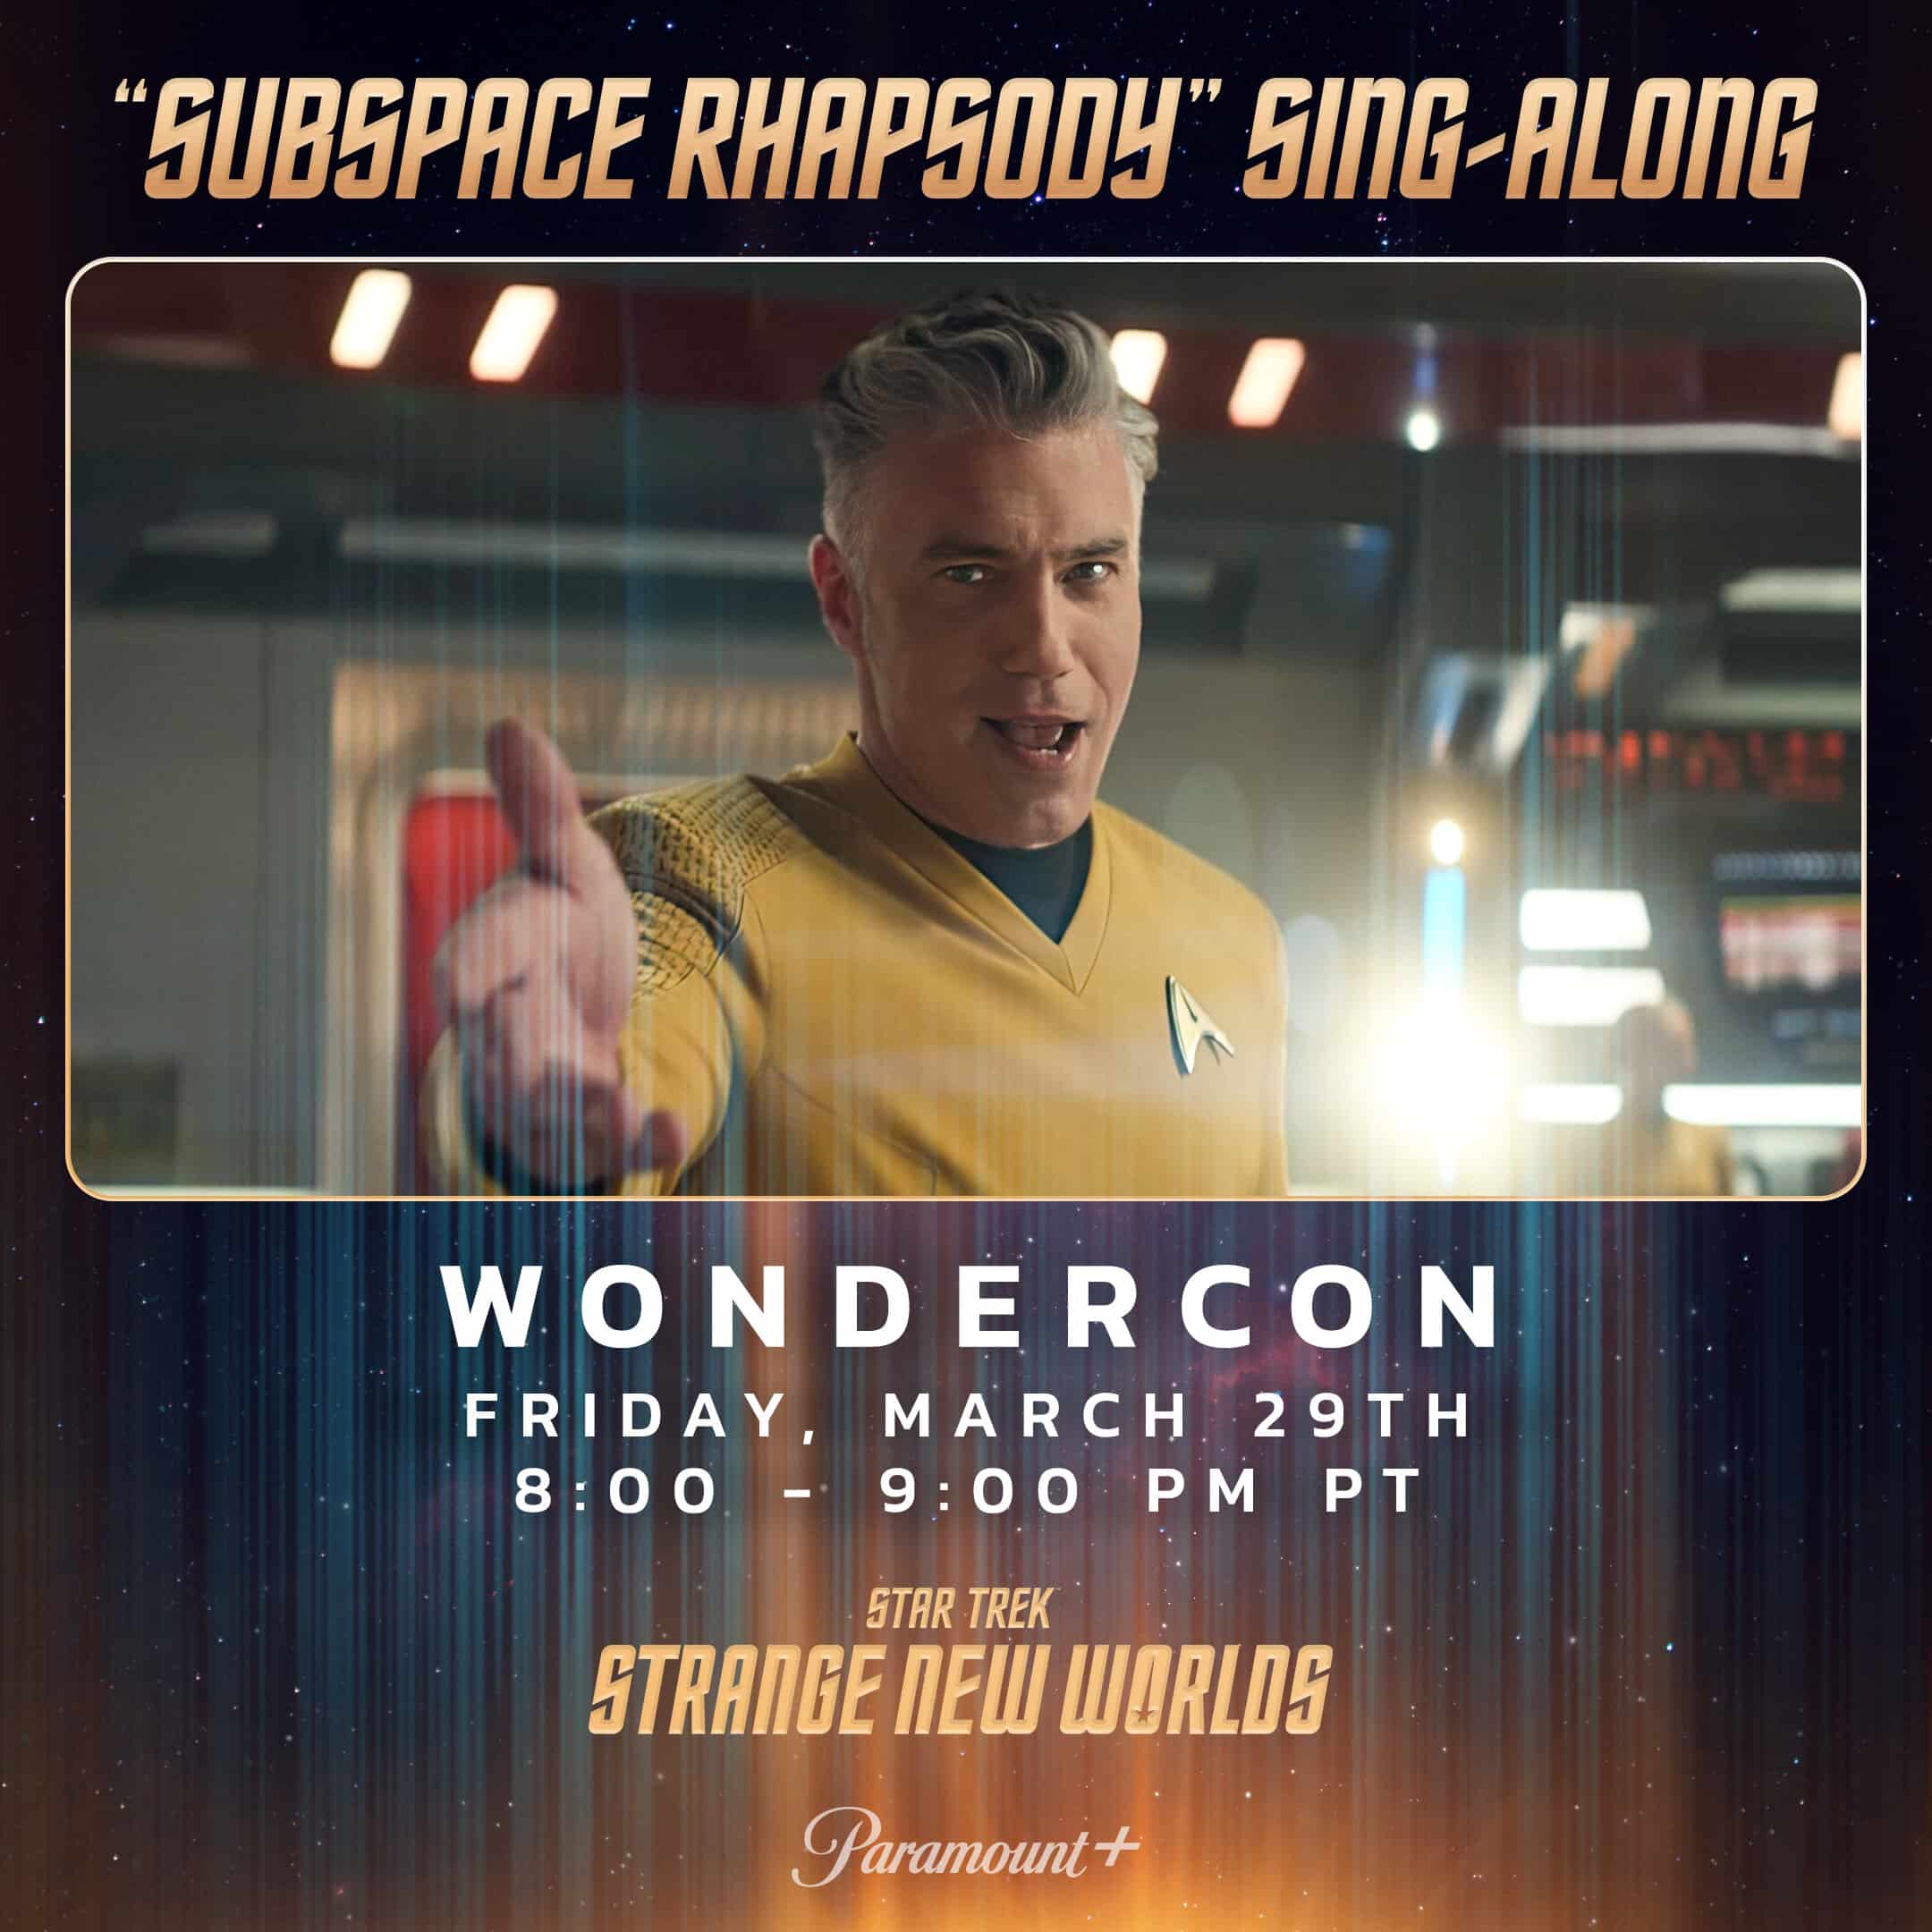 Captain Pike sings on the bridge of the Enterprise in this infographic for the "Subspace Rhapsody" Sing-Along.